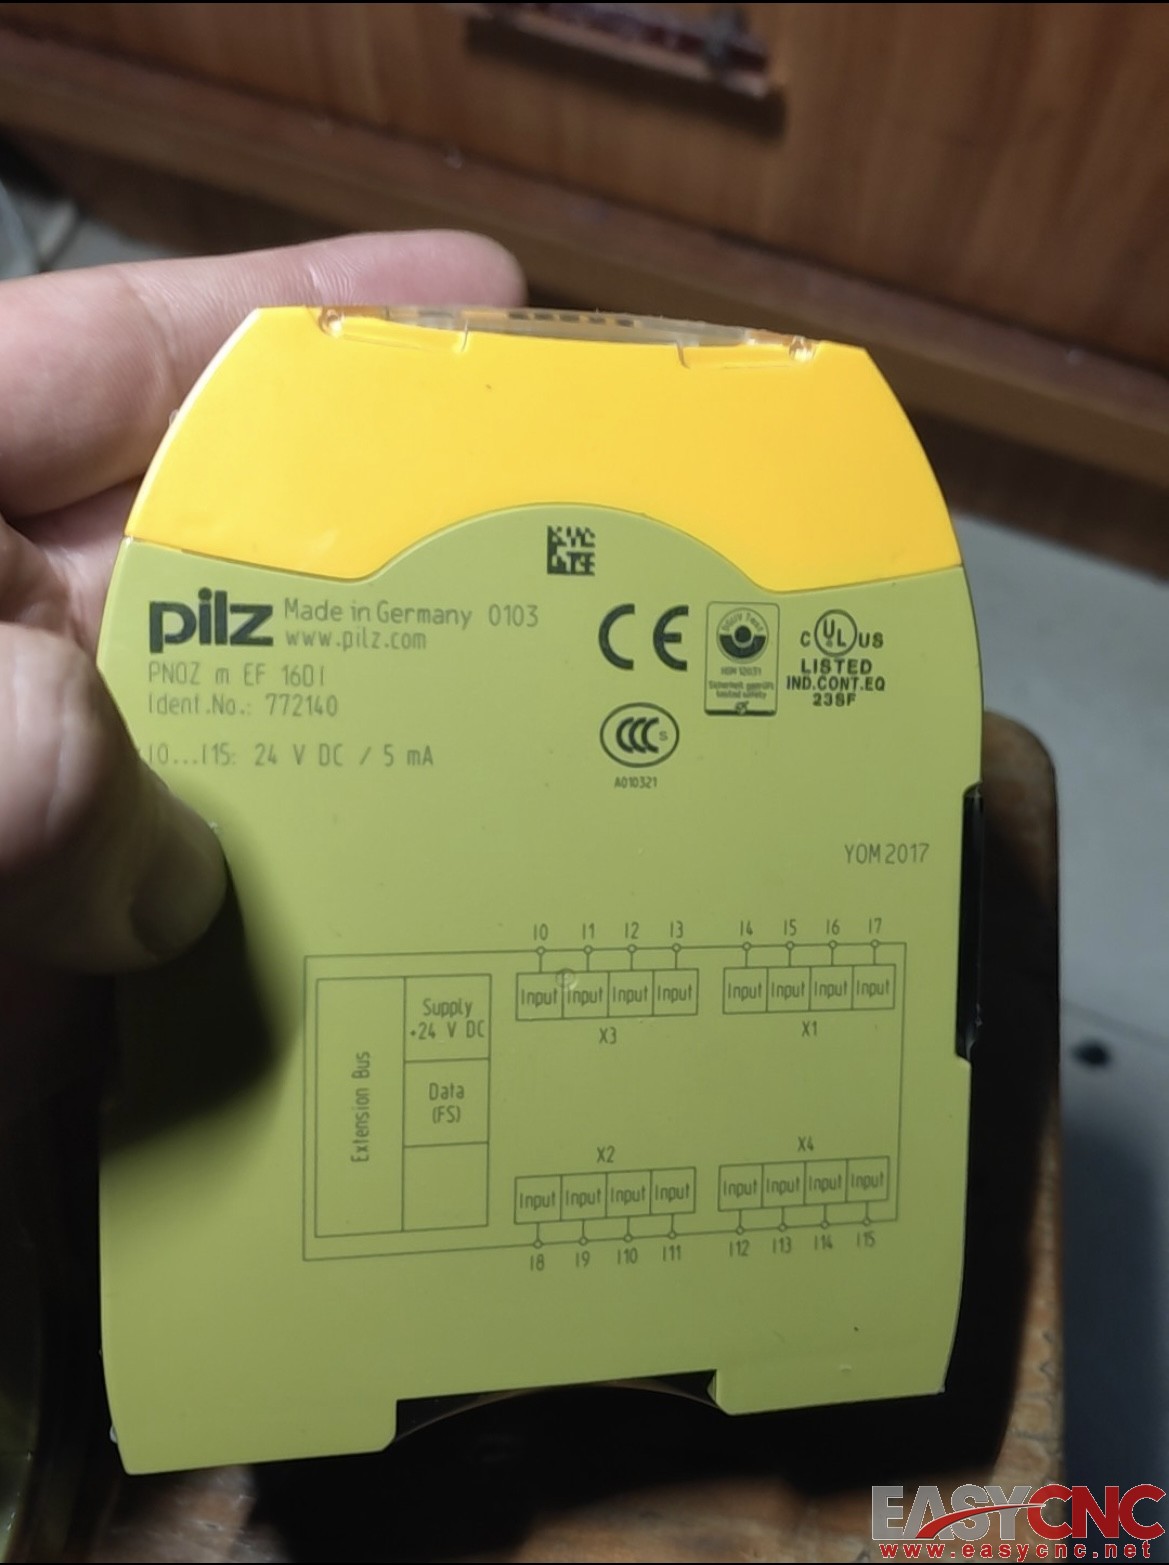 772140 PNOZ m EF 16DI Pilz Safety Relay New And Original